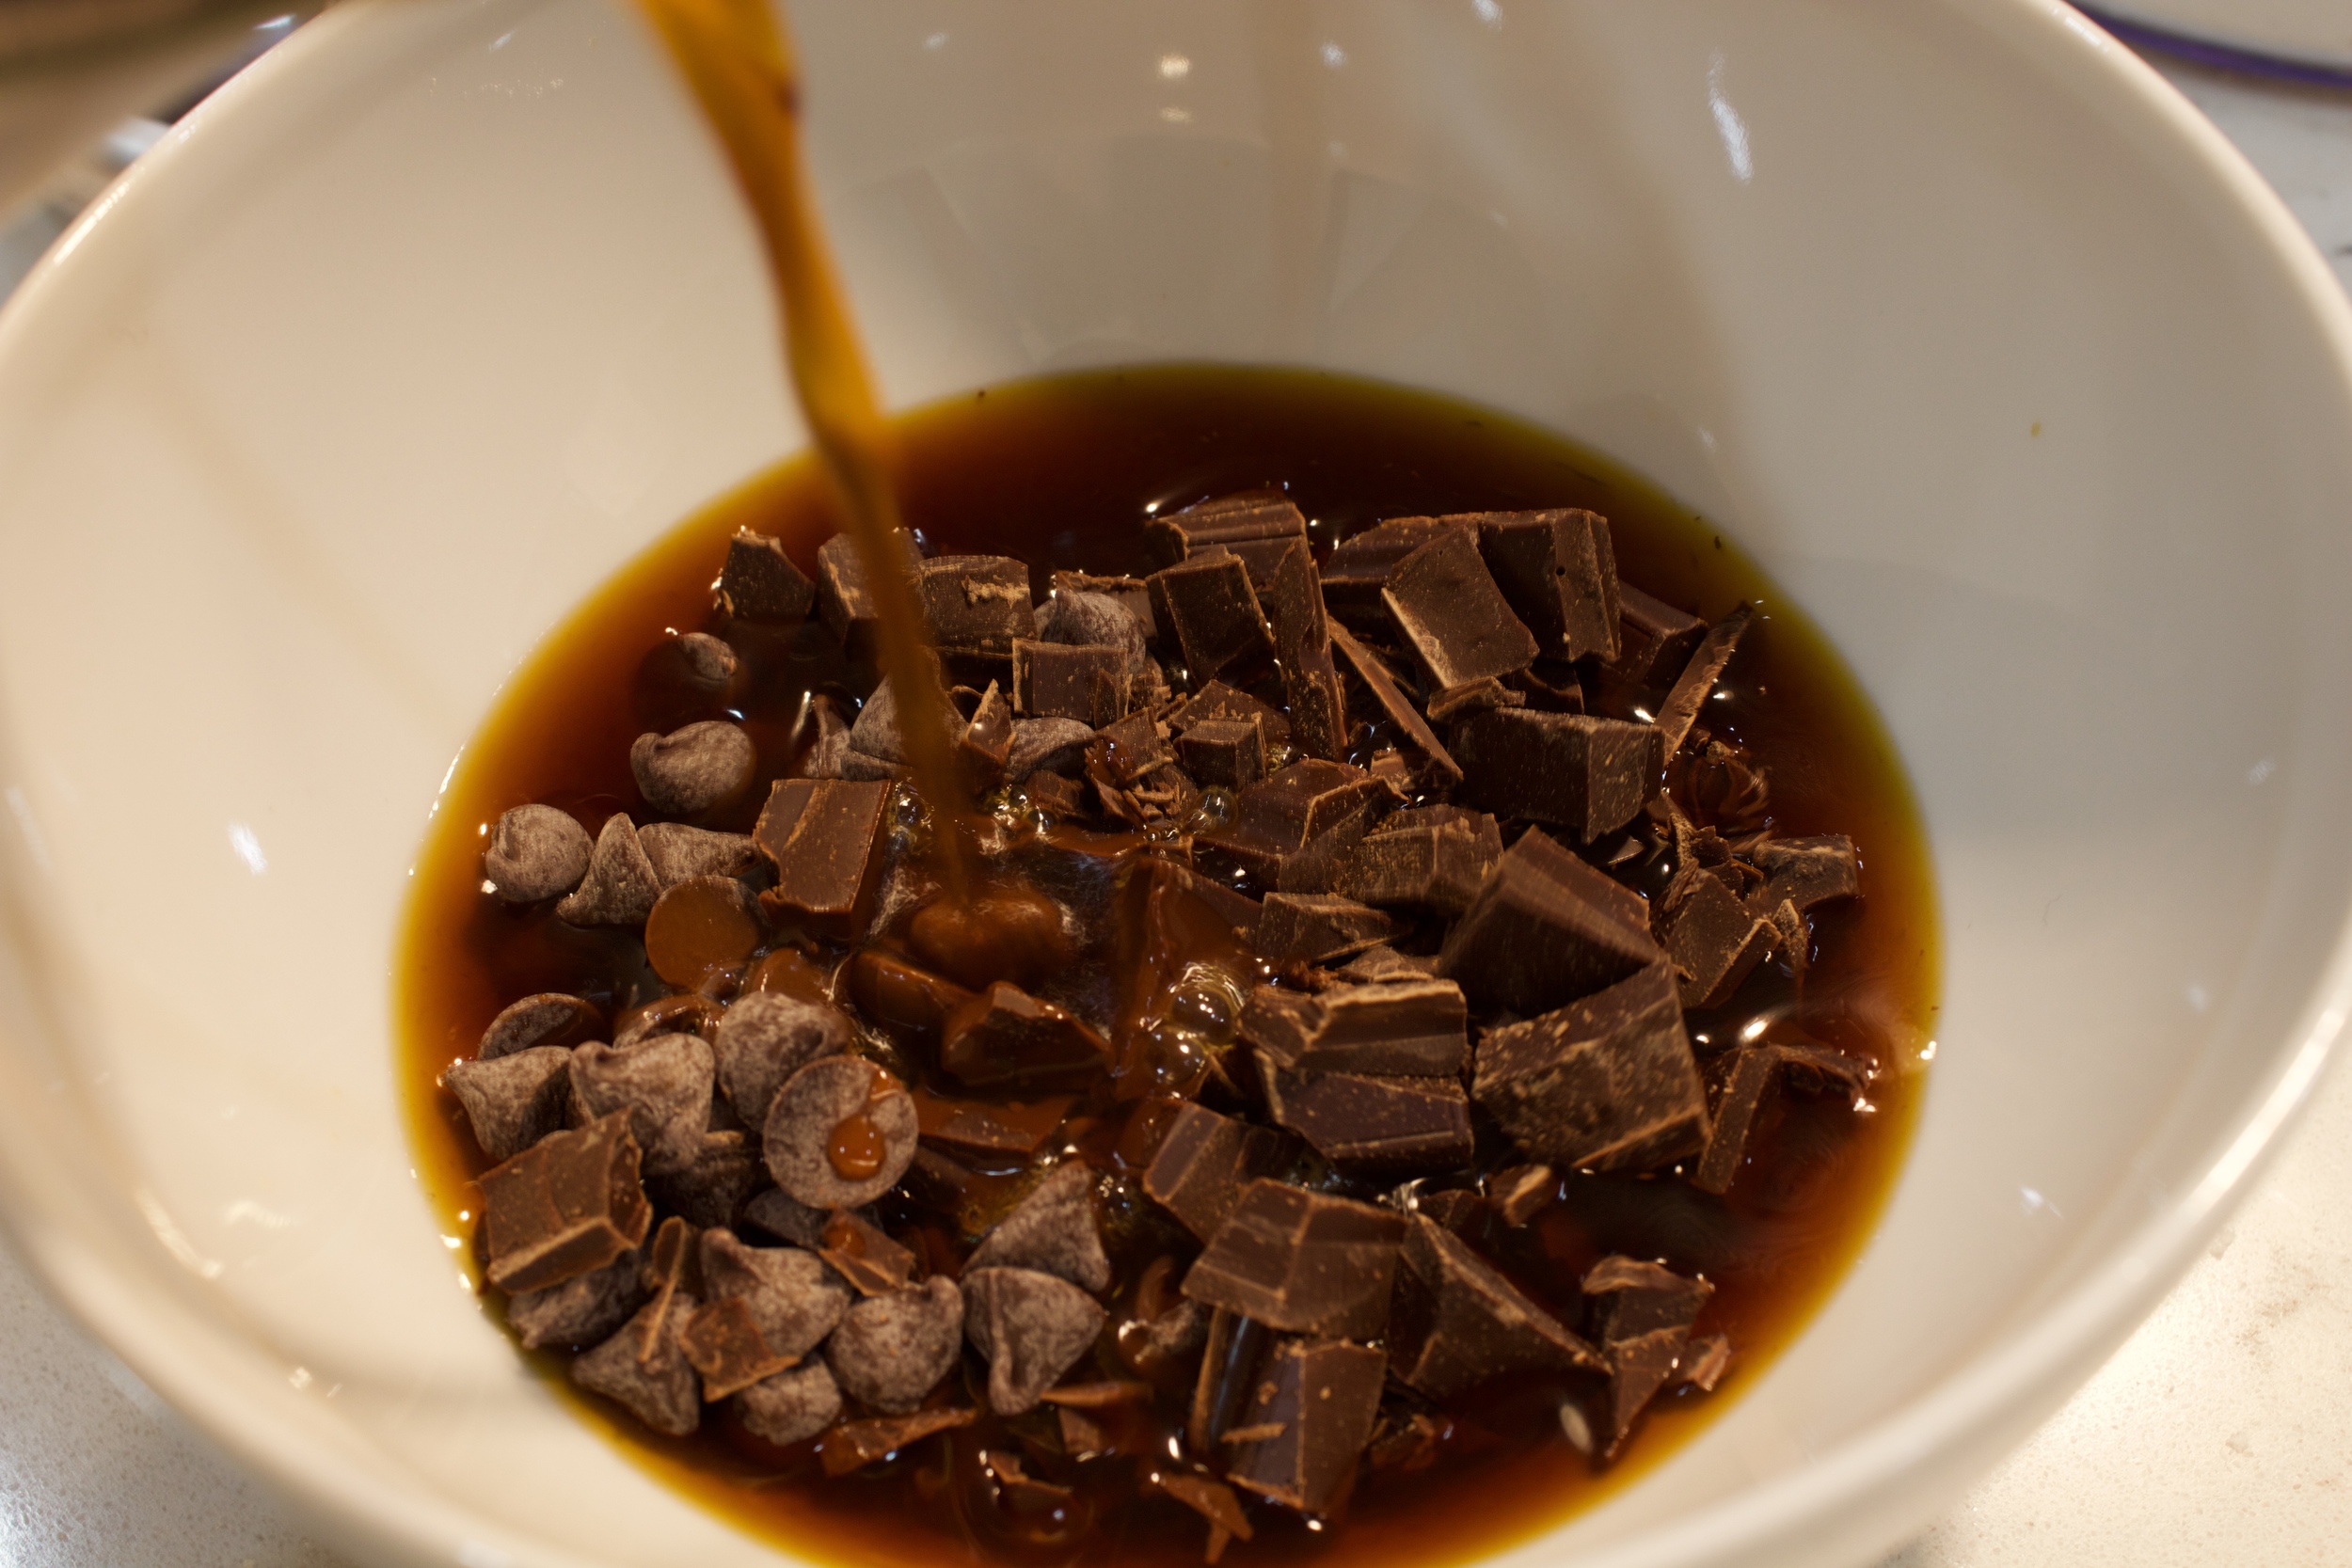  Pour the hot coffee into the bowl of chocolate and allow it to sit for about two minutes 